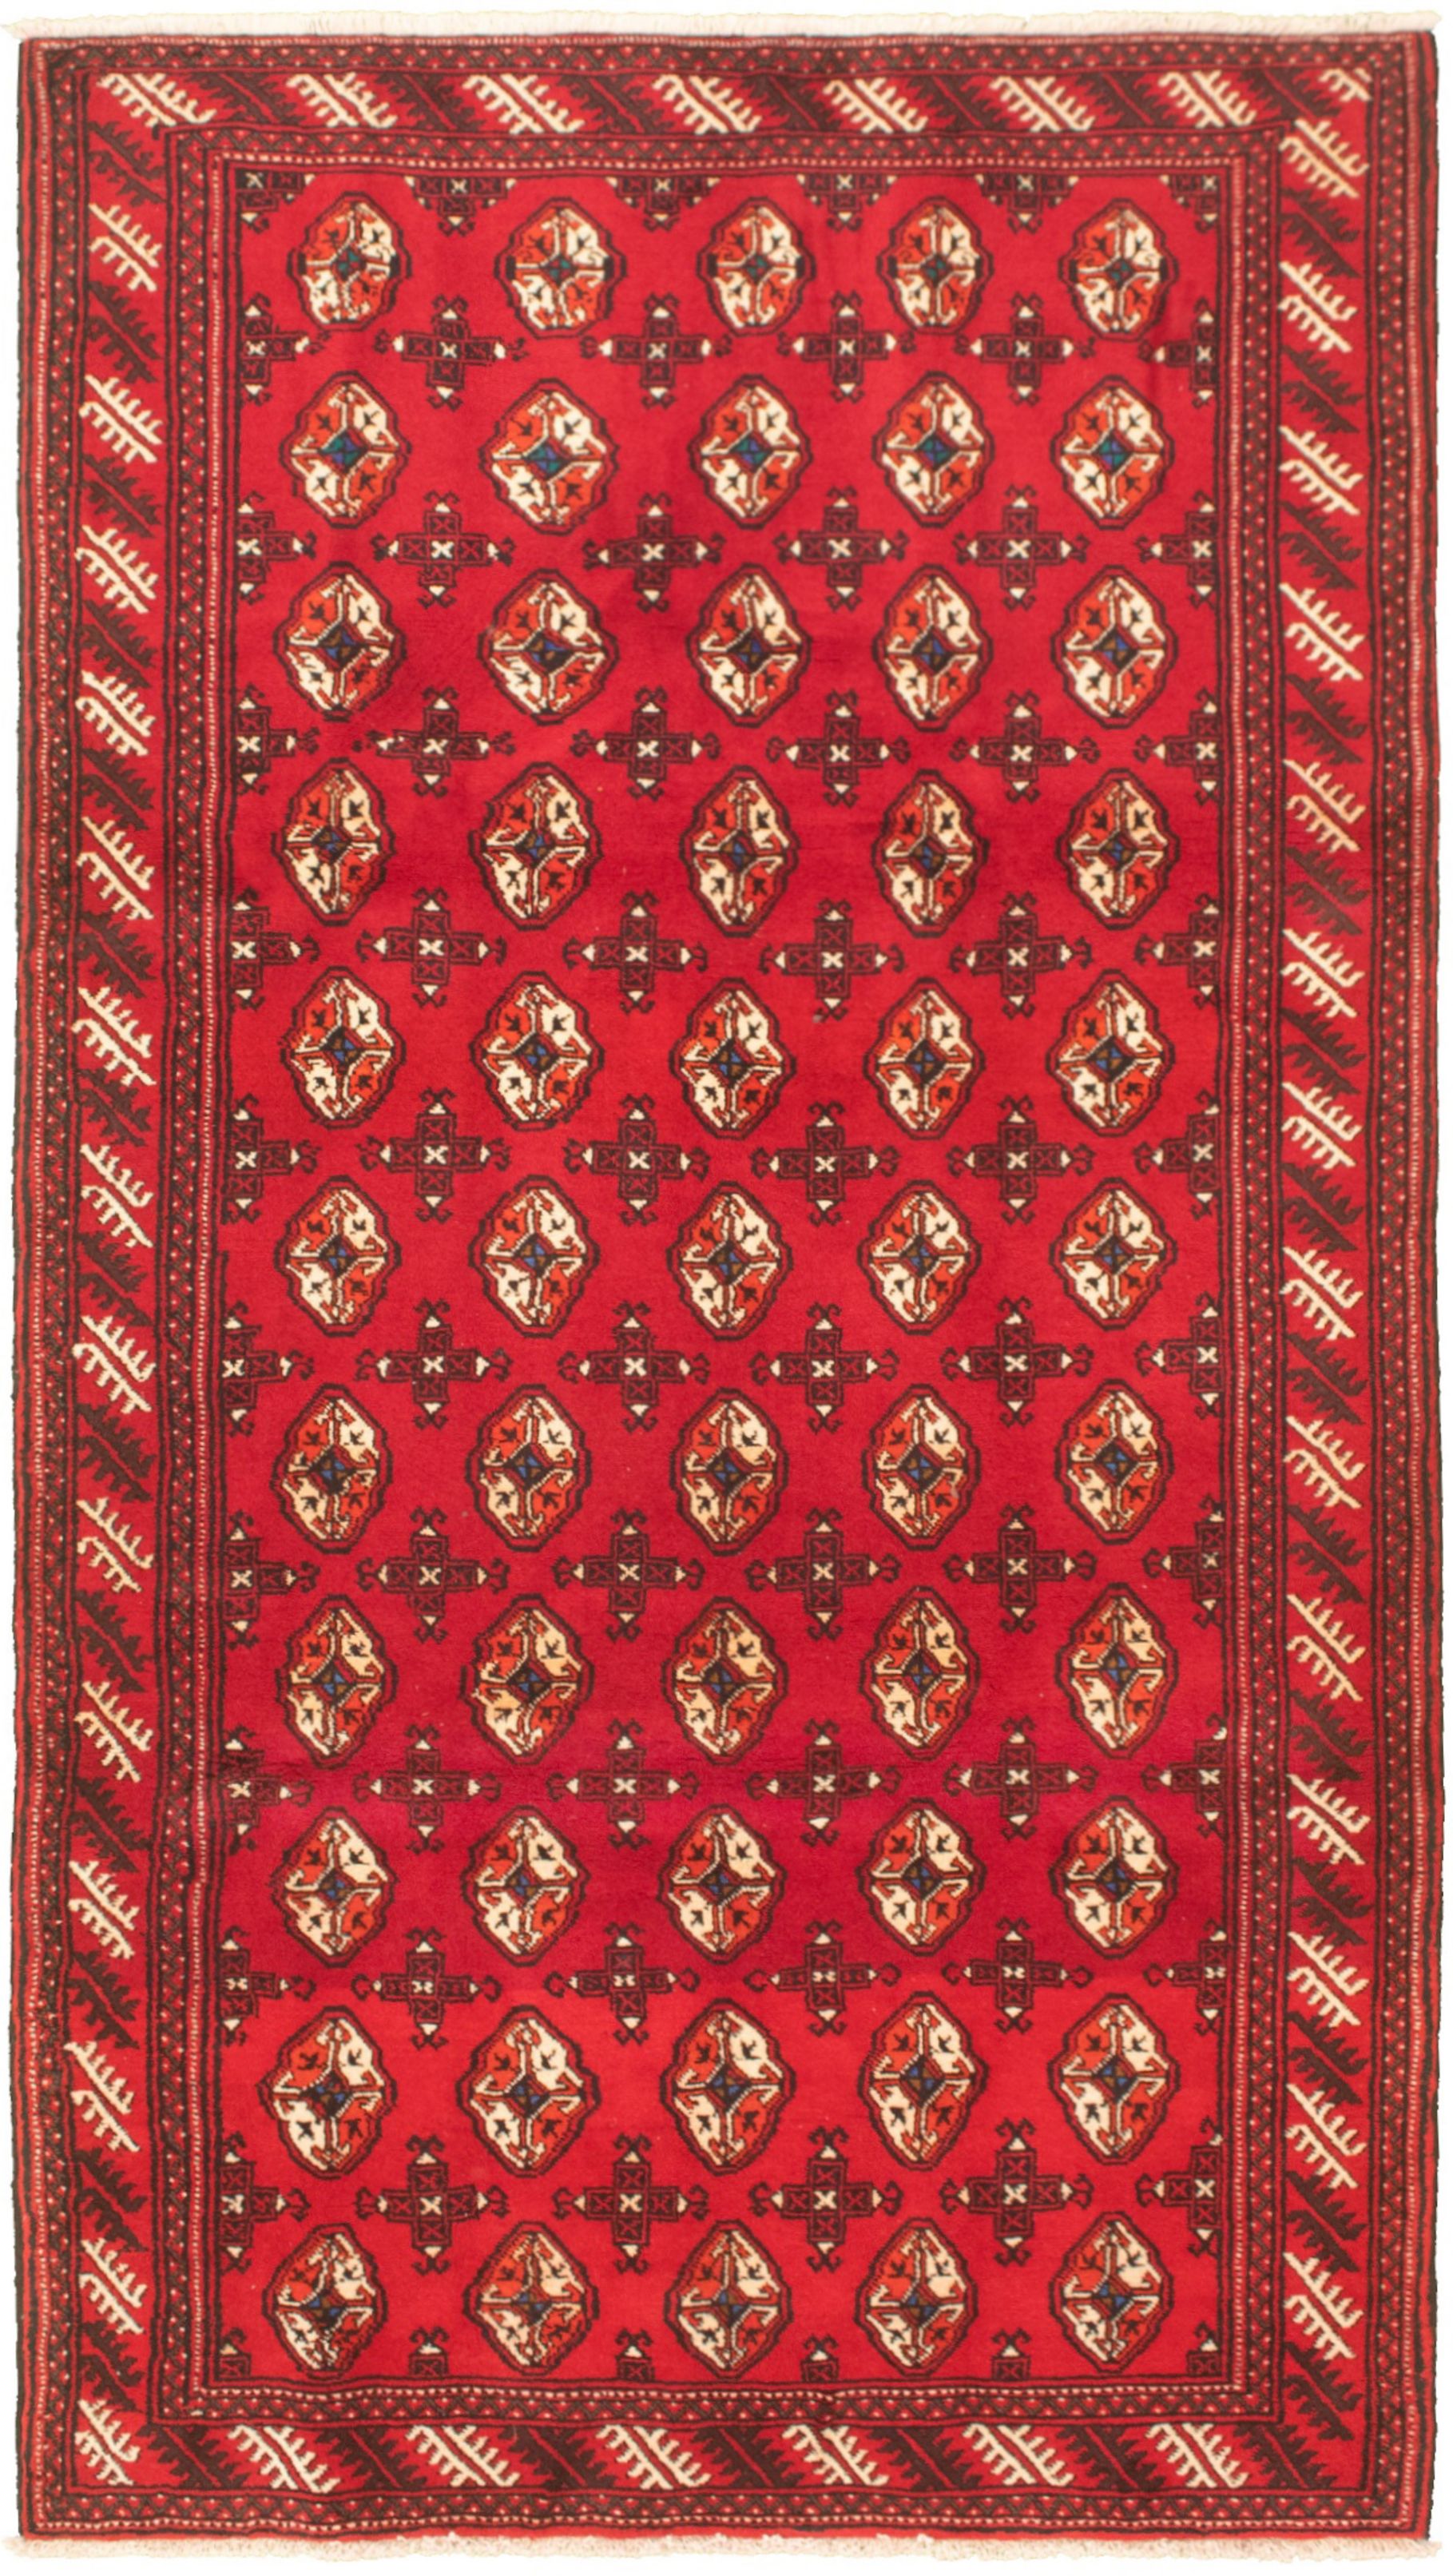 Hand-knotted Shiravan Bokhara Red Wool Rug 5'1" x 9'5" Size: 5'1" x 9'5"  